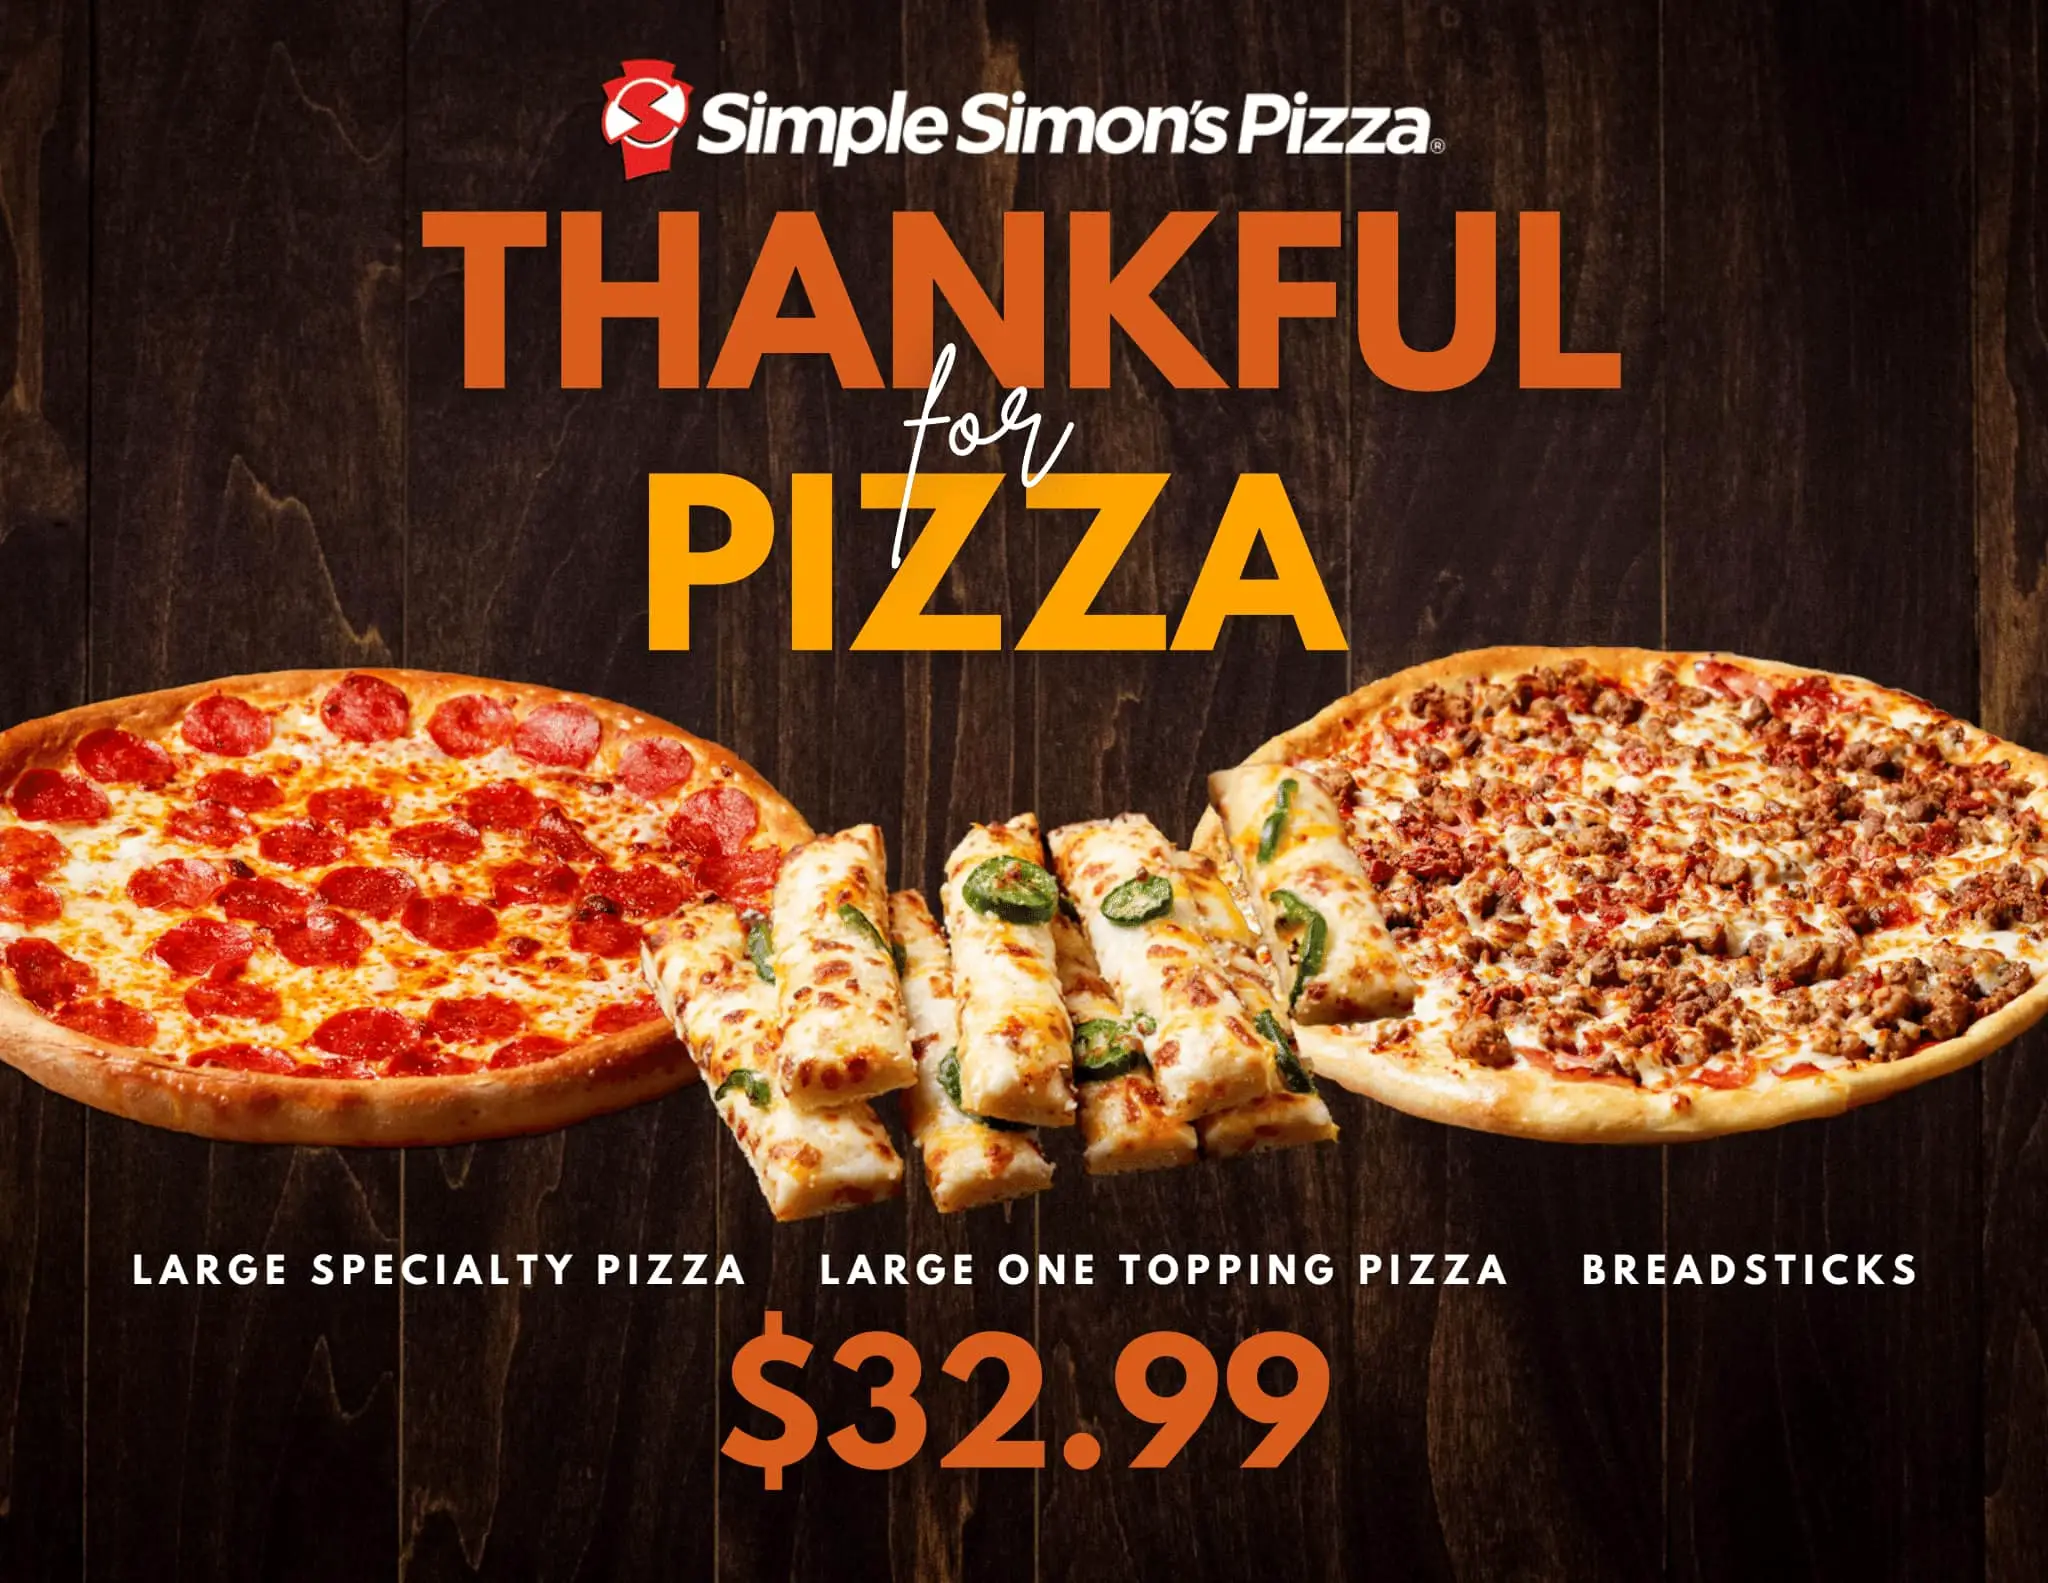 Simple Simon's Pizza Thanksgiving Get a Large Specialty Pizza, Large 1 Topping Pizza and Breadsticks for $32.99